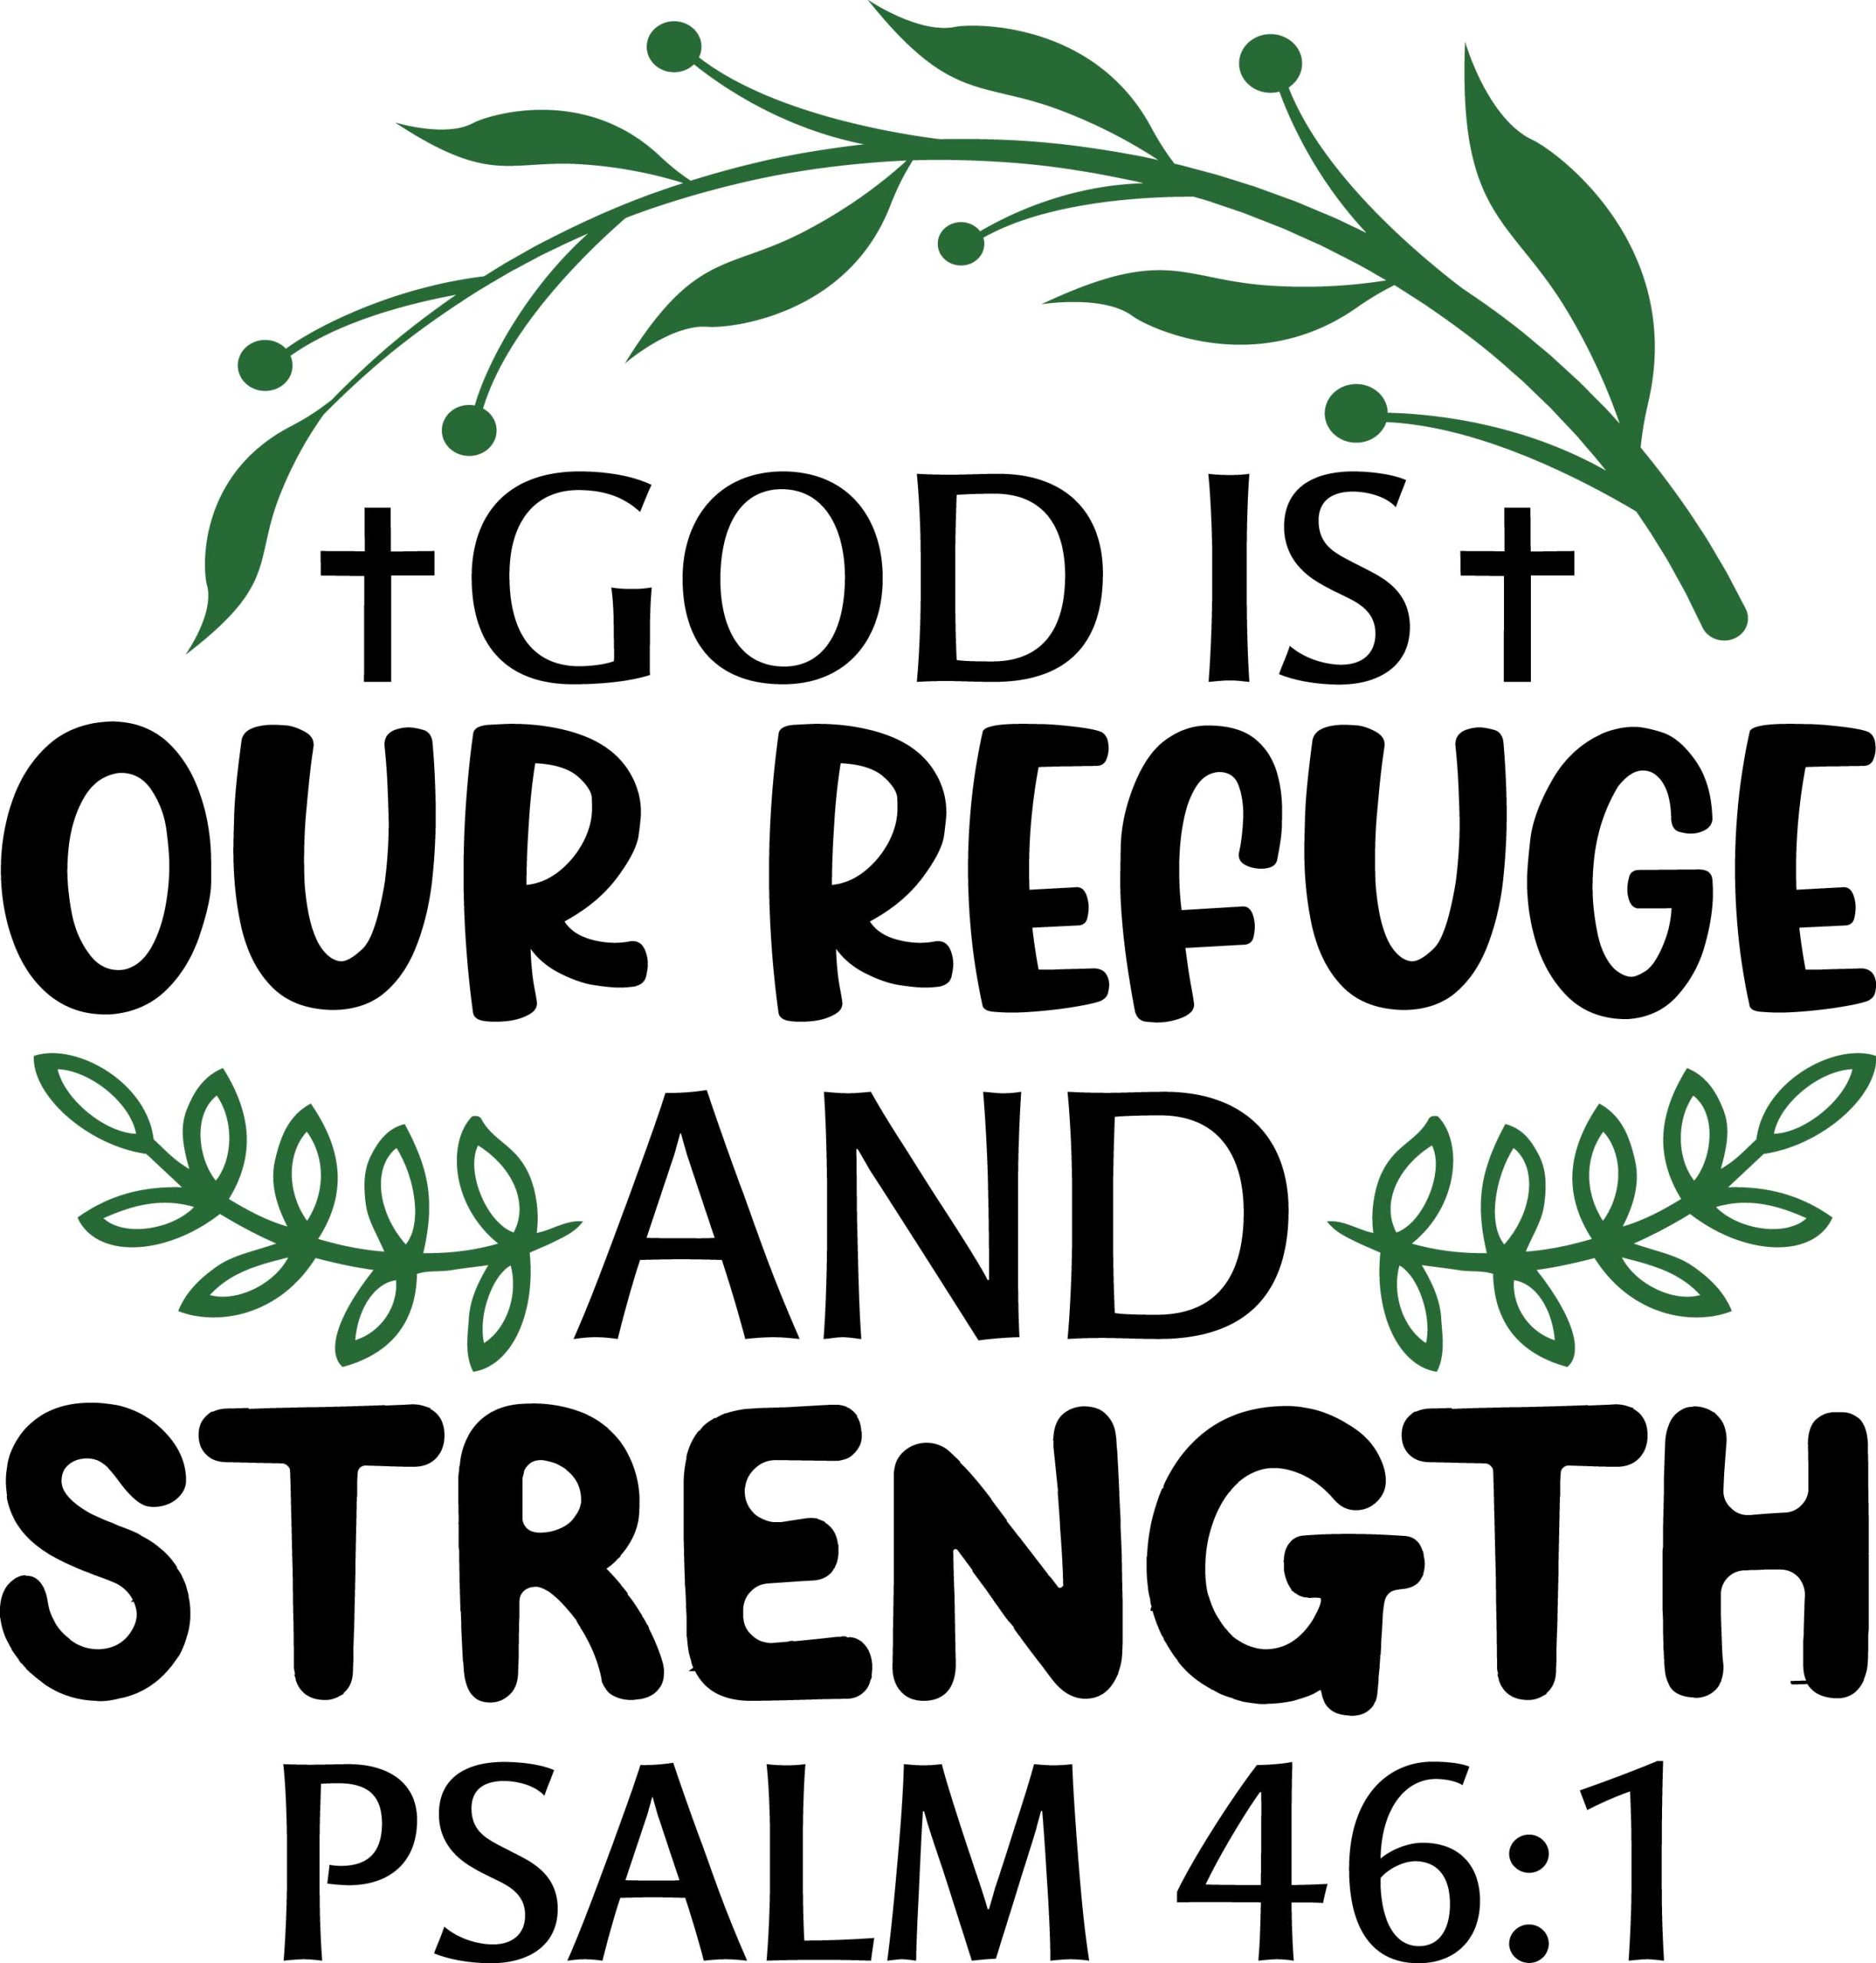 God is our refuge and strength psalm 46:1, bible verses, scripture verses, svg files, passages, sayings, cricut designs, silhouette, embroidery, bundle, free cut files, design space, vector